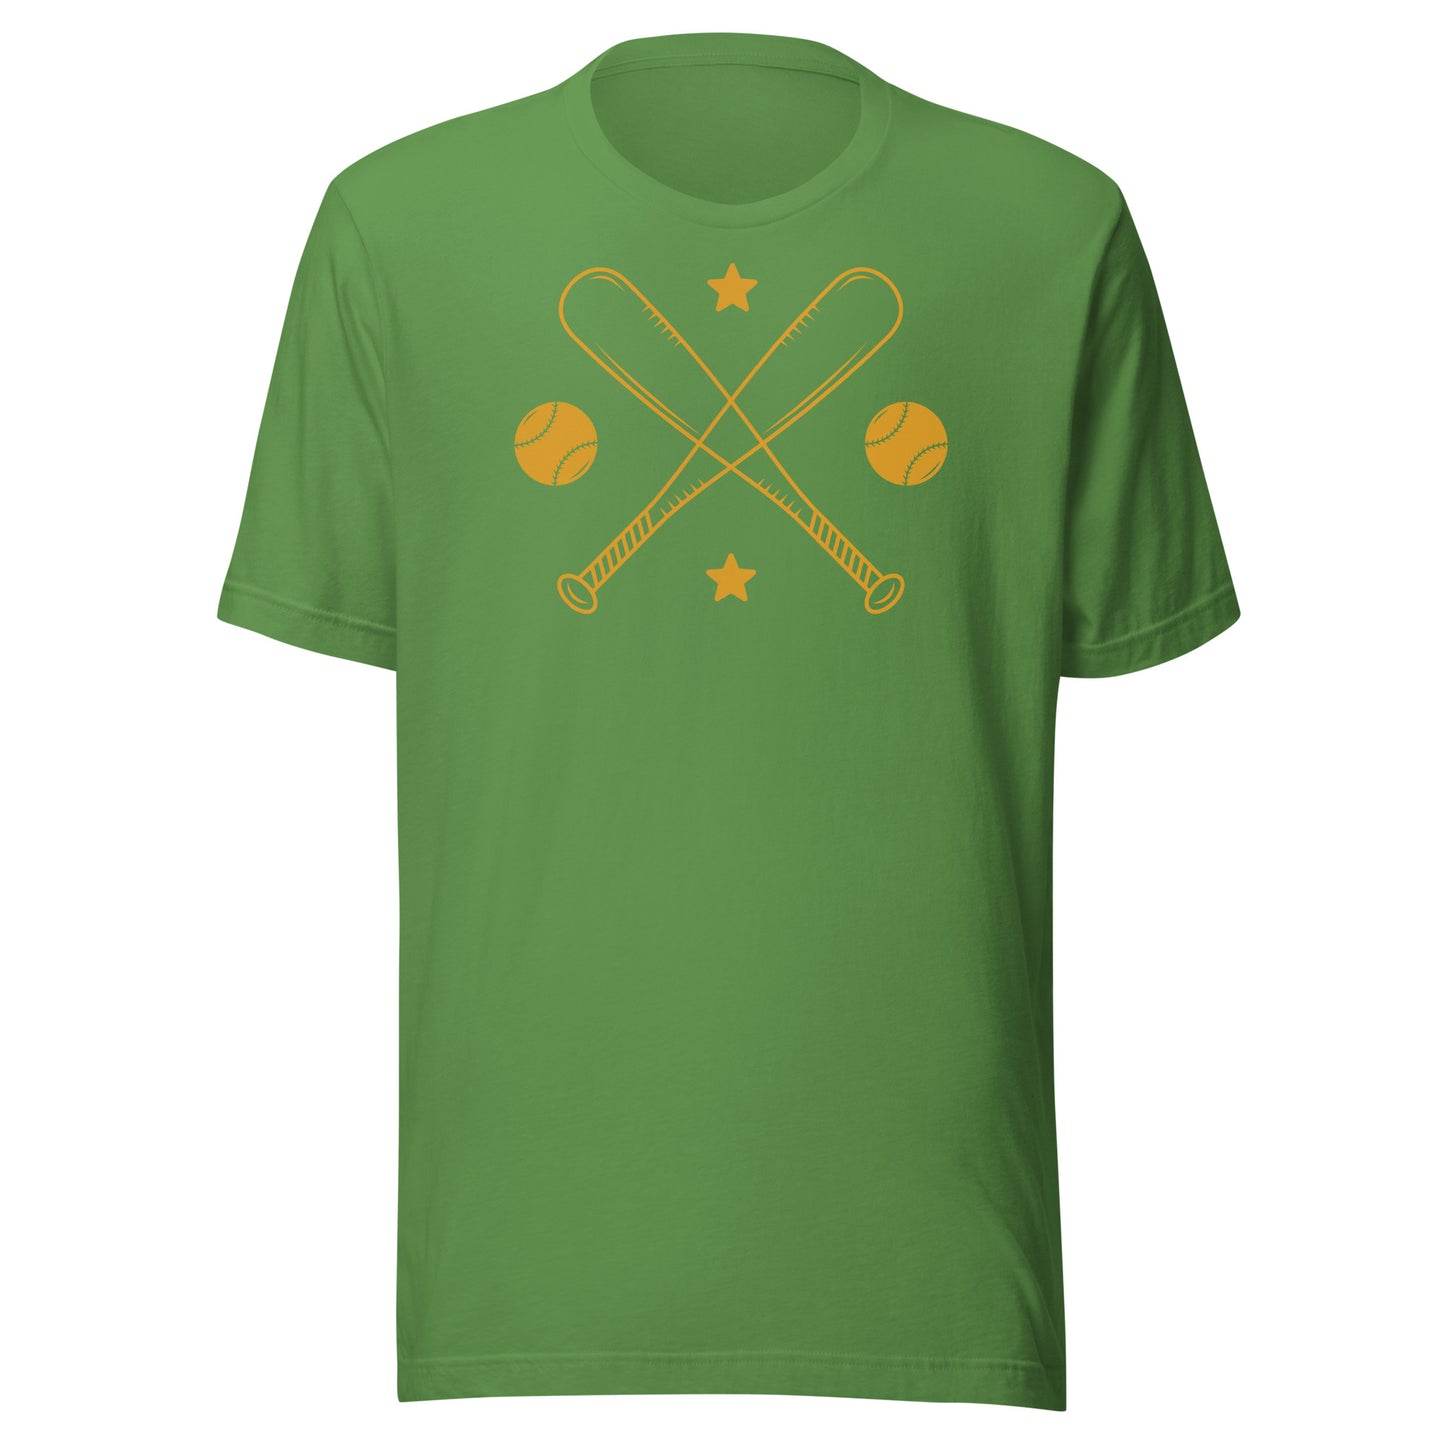 Baseball-Inspired T-Shirts for Fans and Players Alike!